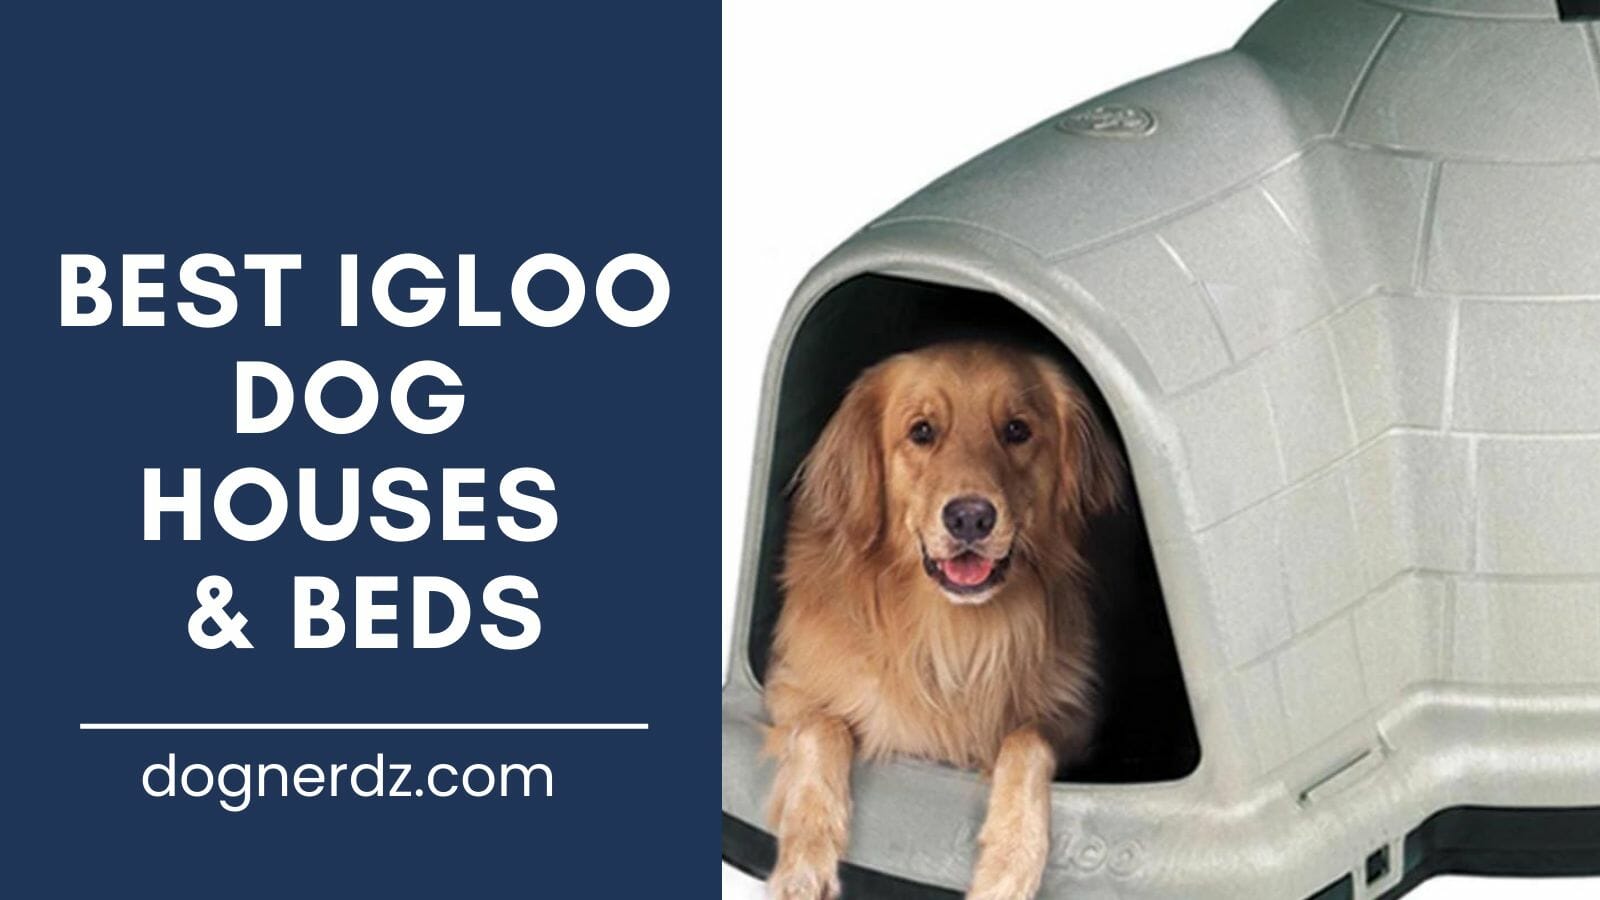 review of the best igloo dog houses & beds